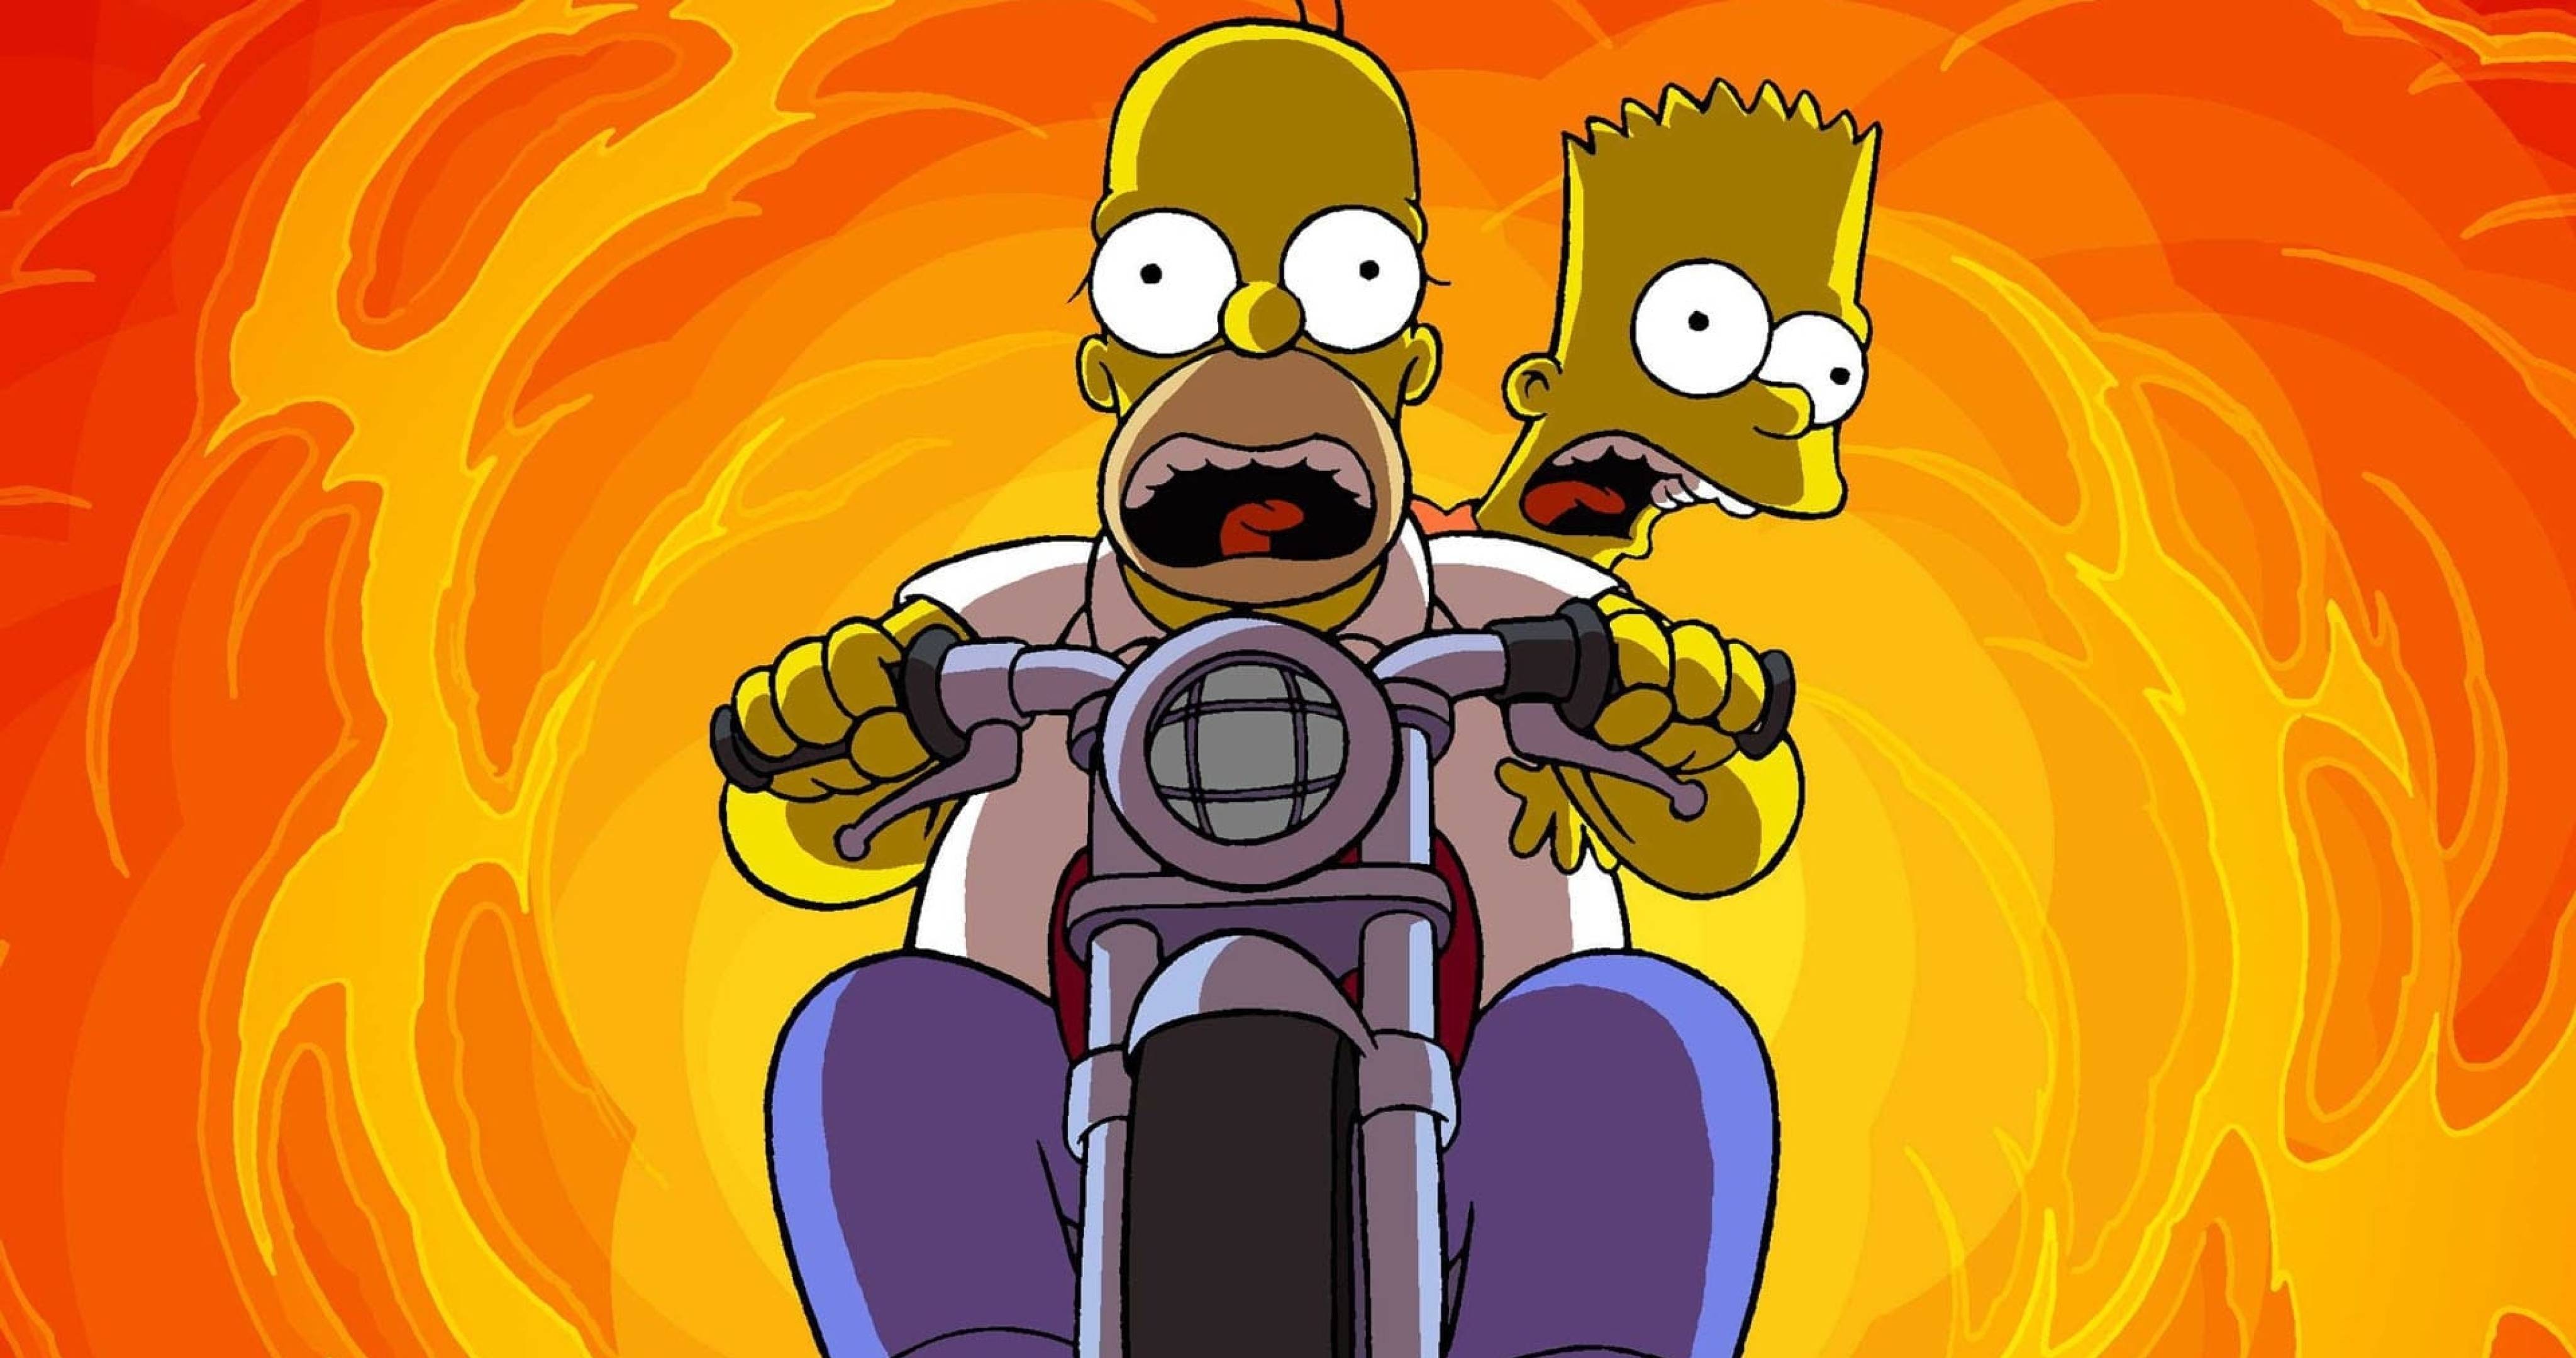 The simpsons ride into a flame - The Simpsons, Bart Simpson